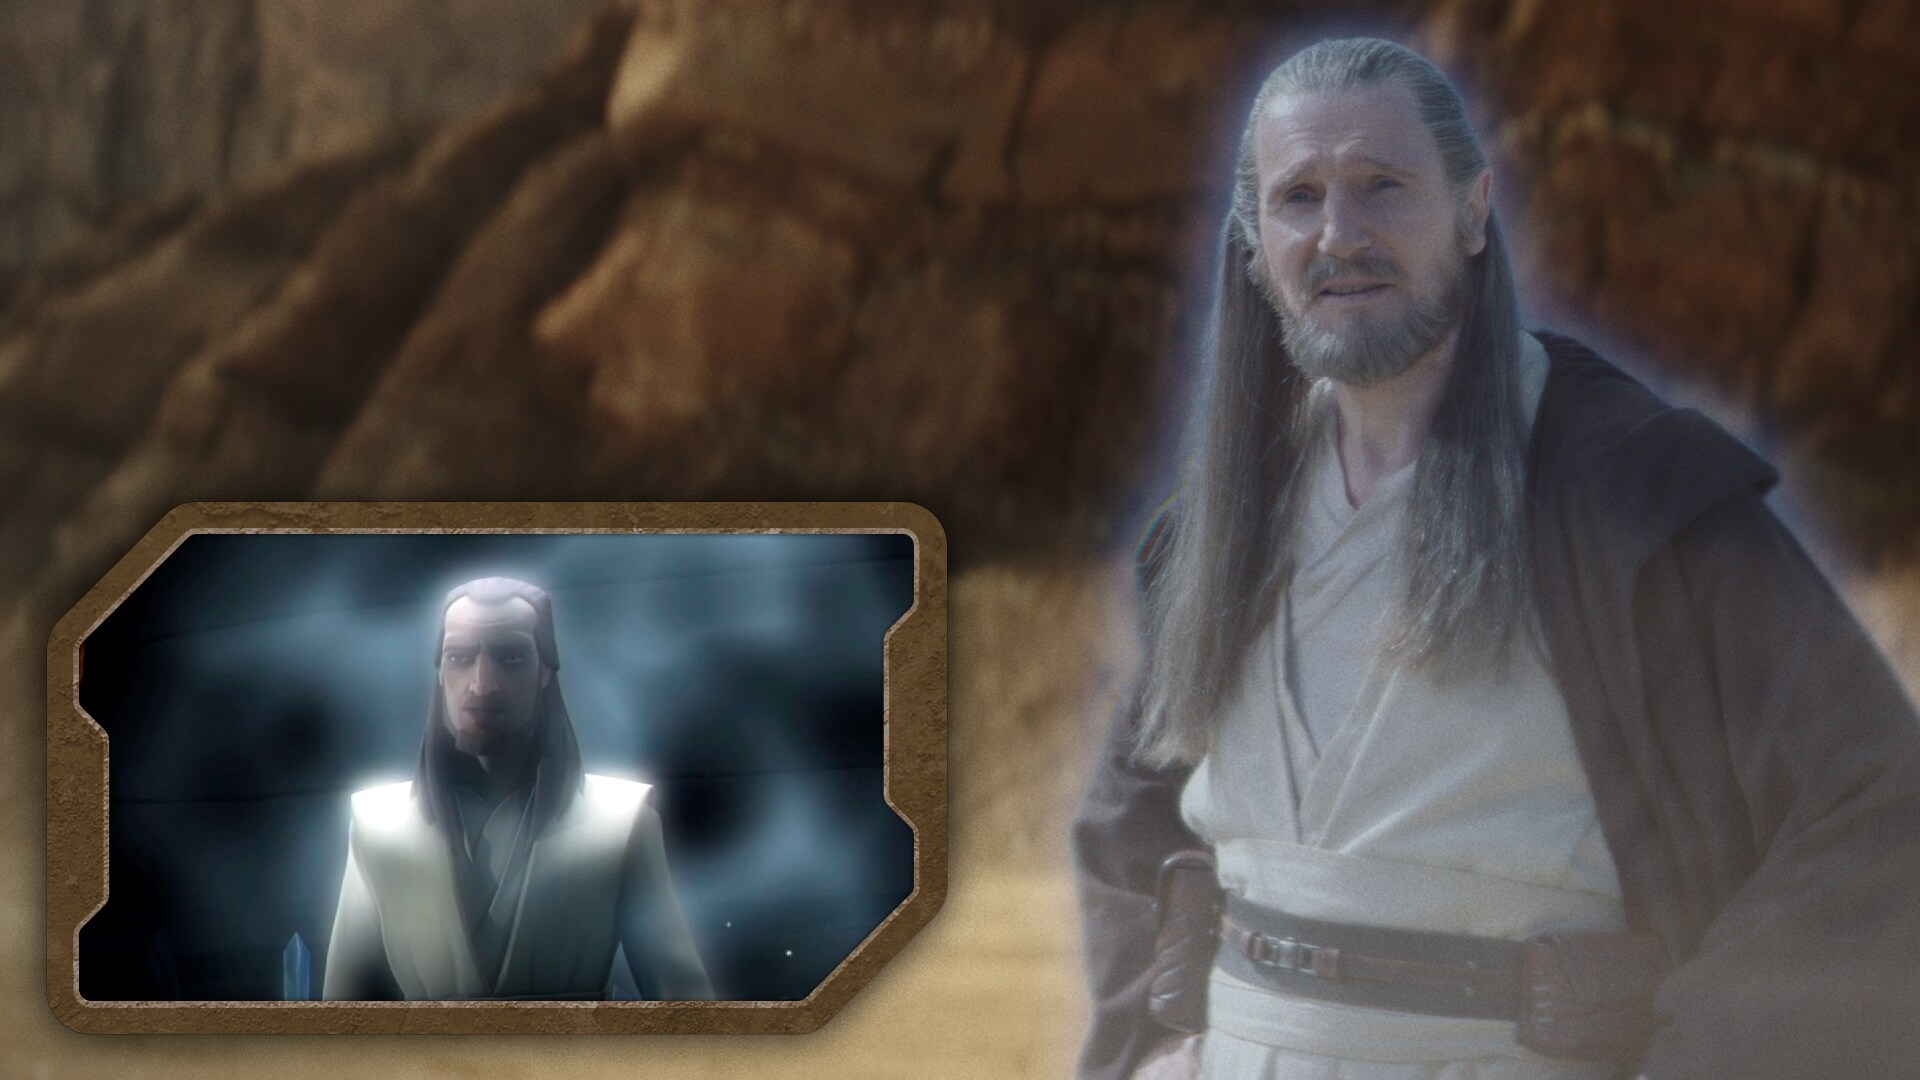 This episode actually marks the third time that Liam Neeson has reprised the role of Qui-Gon Jinn...